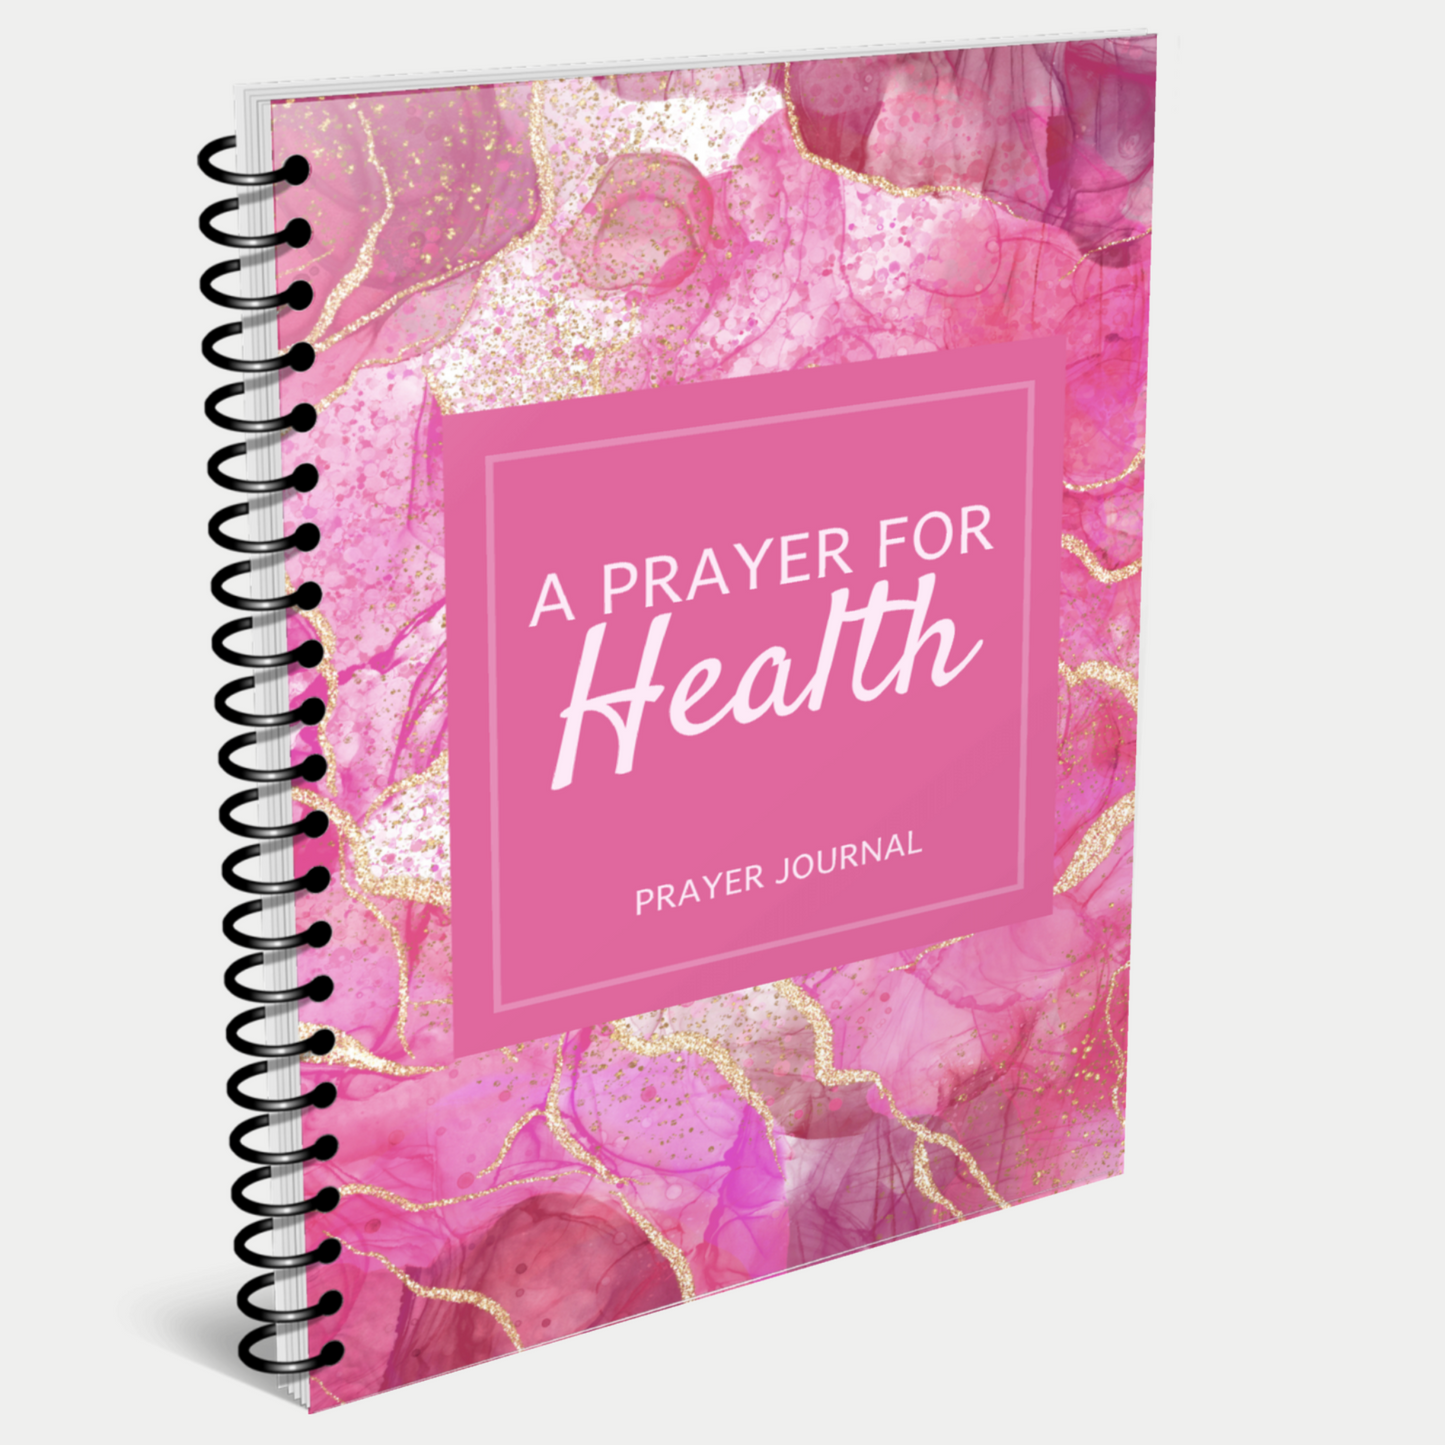 A Prayer for Healing Prayer Journal for Amazon & The Book Patch (spiral)